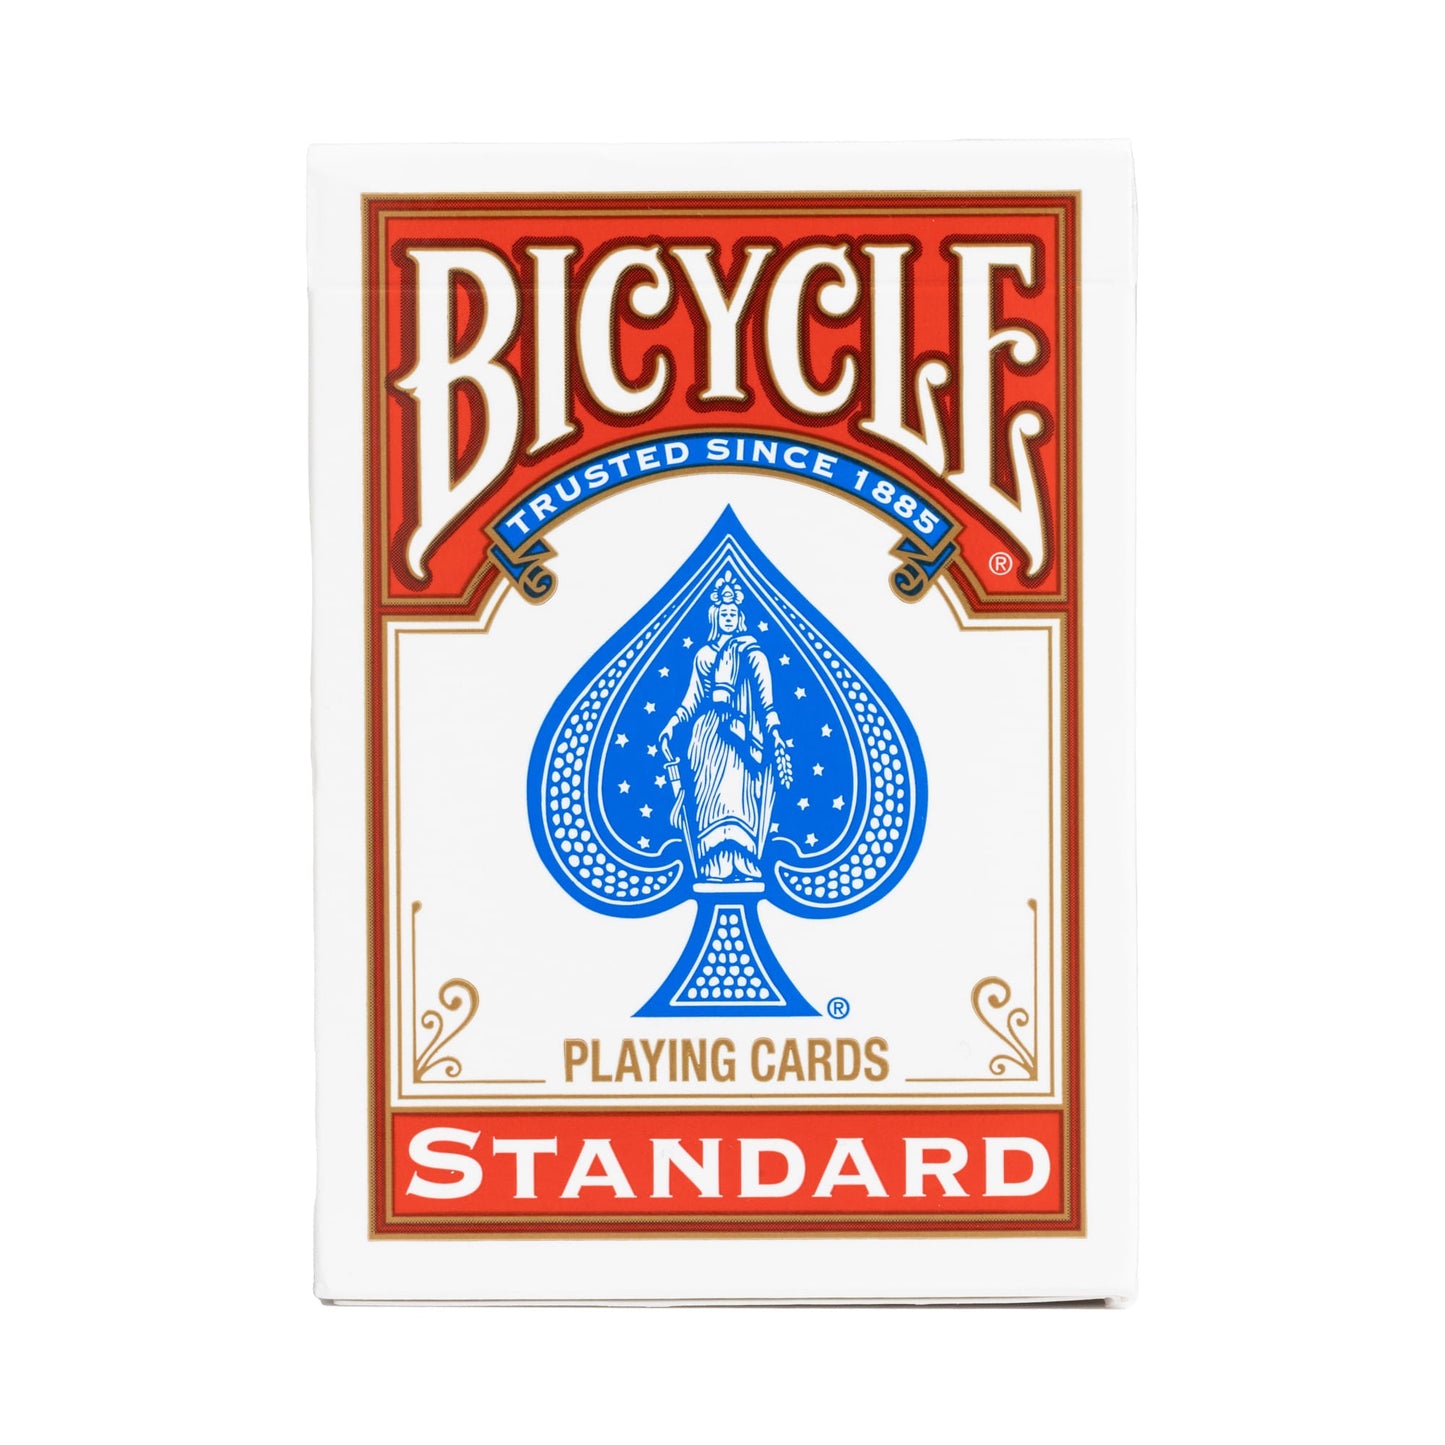 Red bicycle standard barcode marked cards poker cards